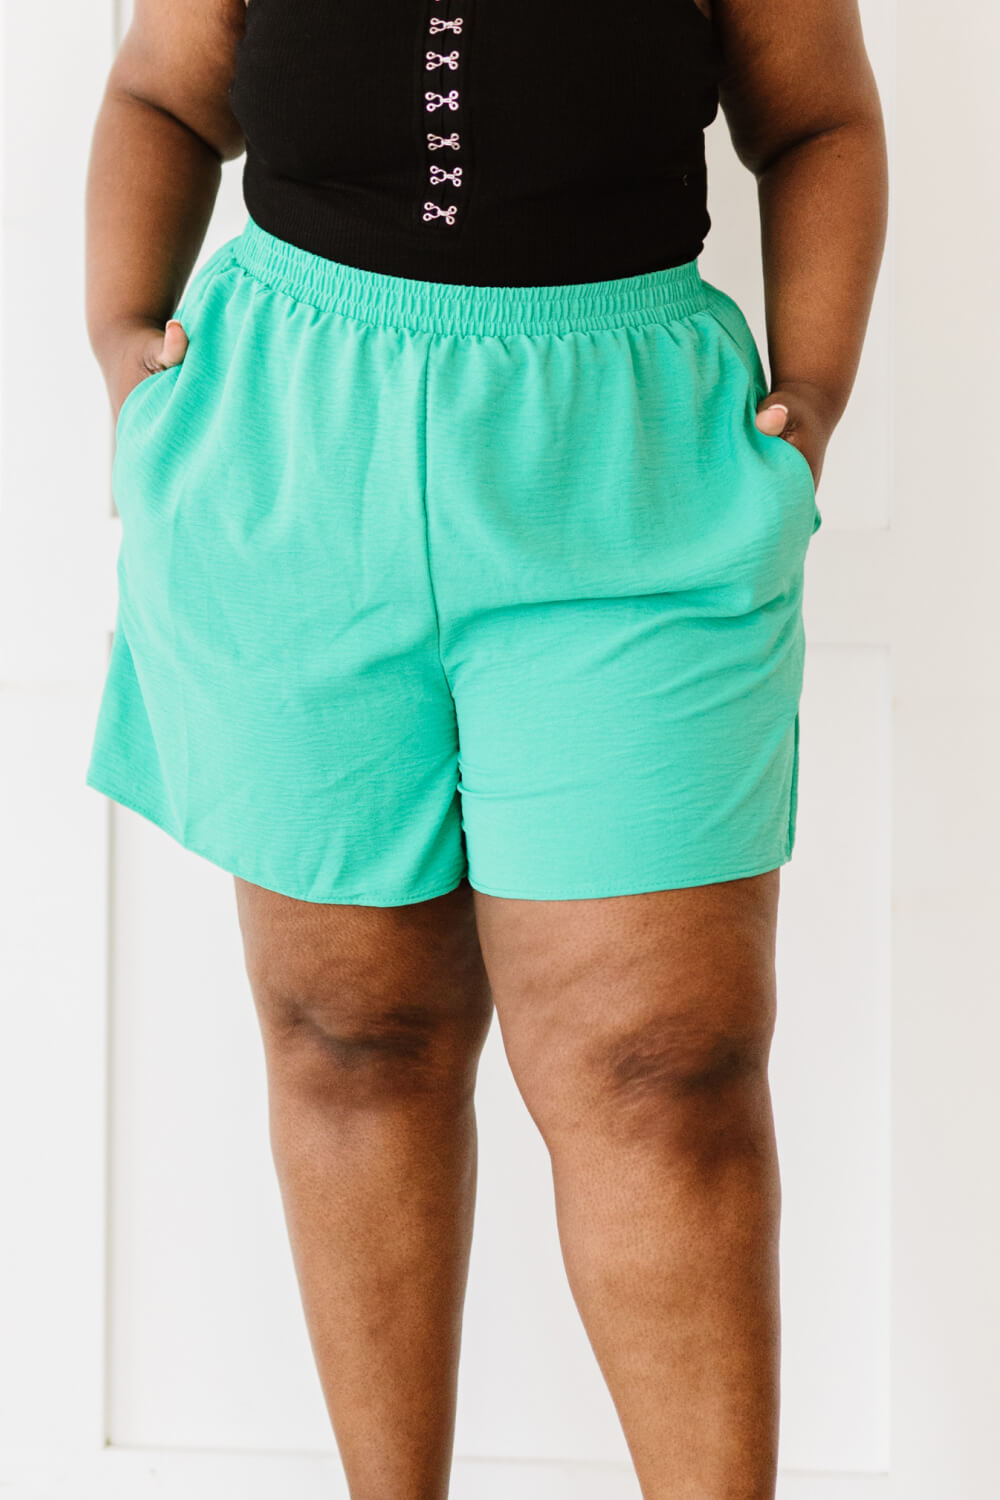 Cotton Bleu Morning Breeze Full Size Airflow Shorts in Kelly Green